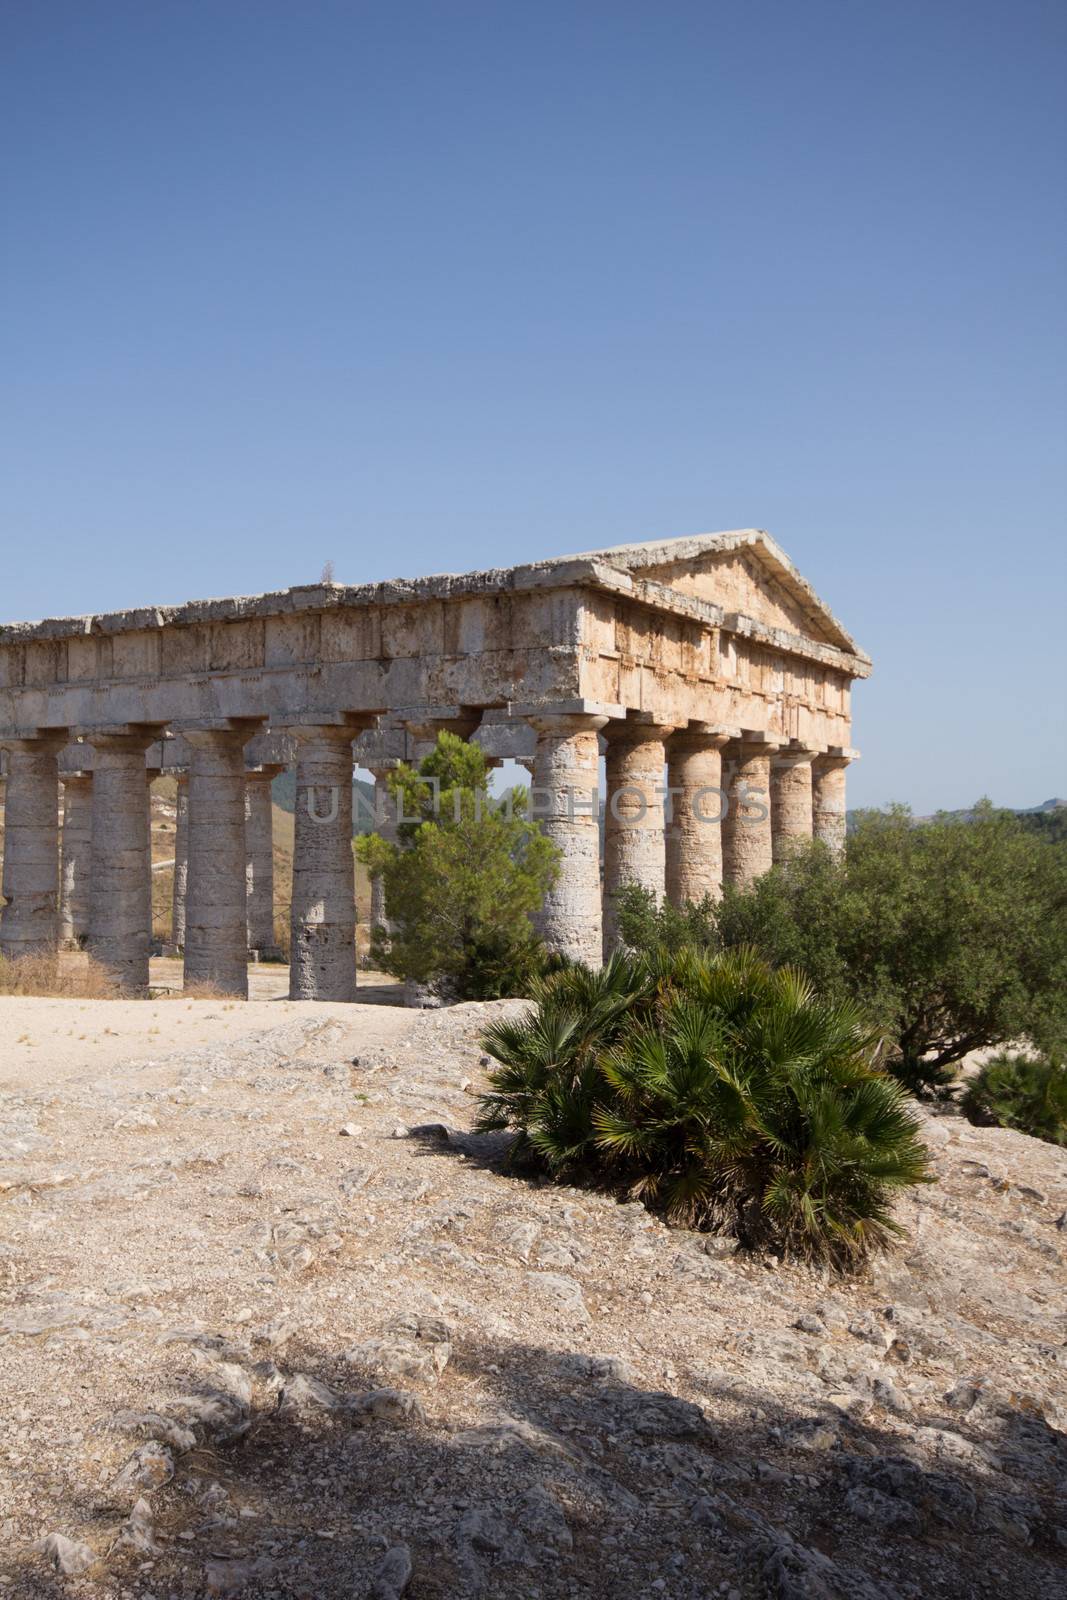 The Doric temple of Segesta by olliemt